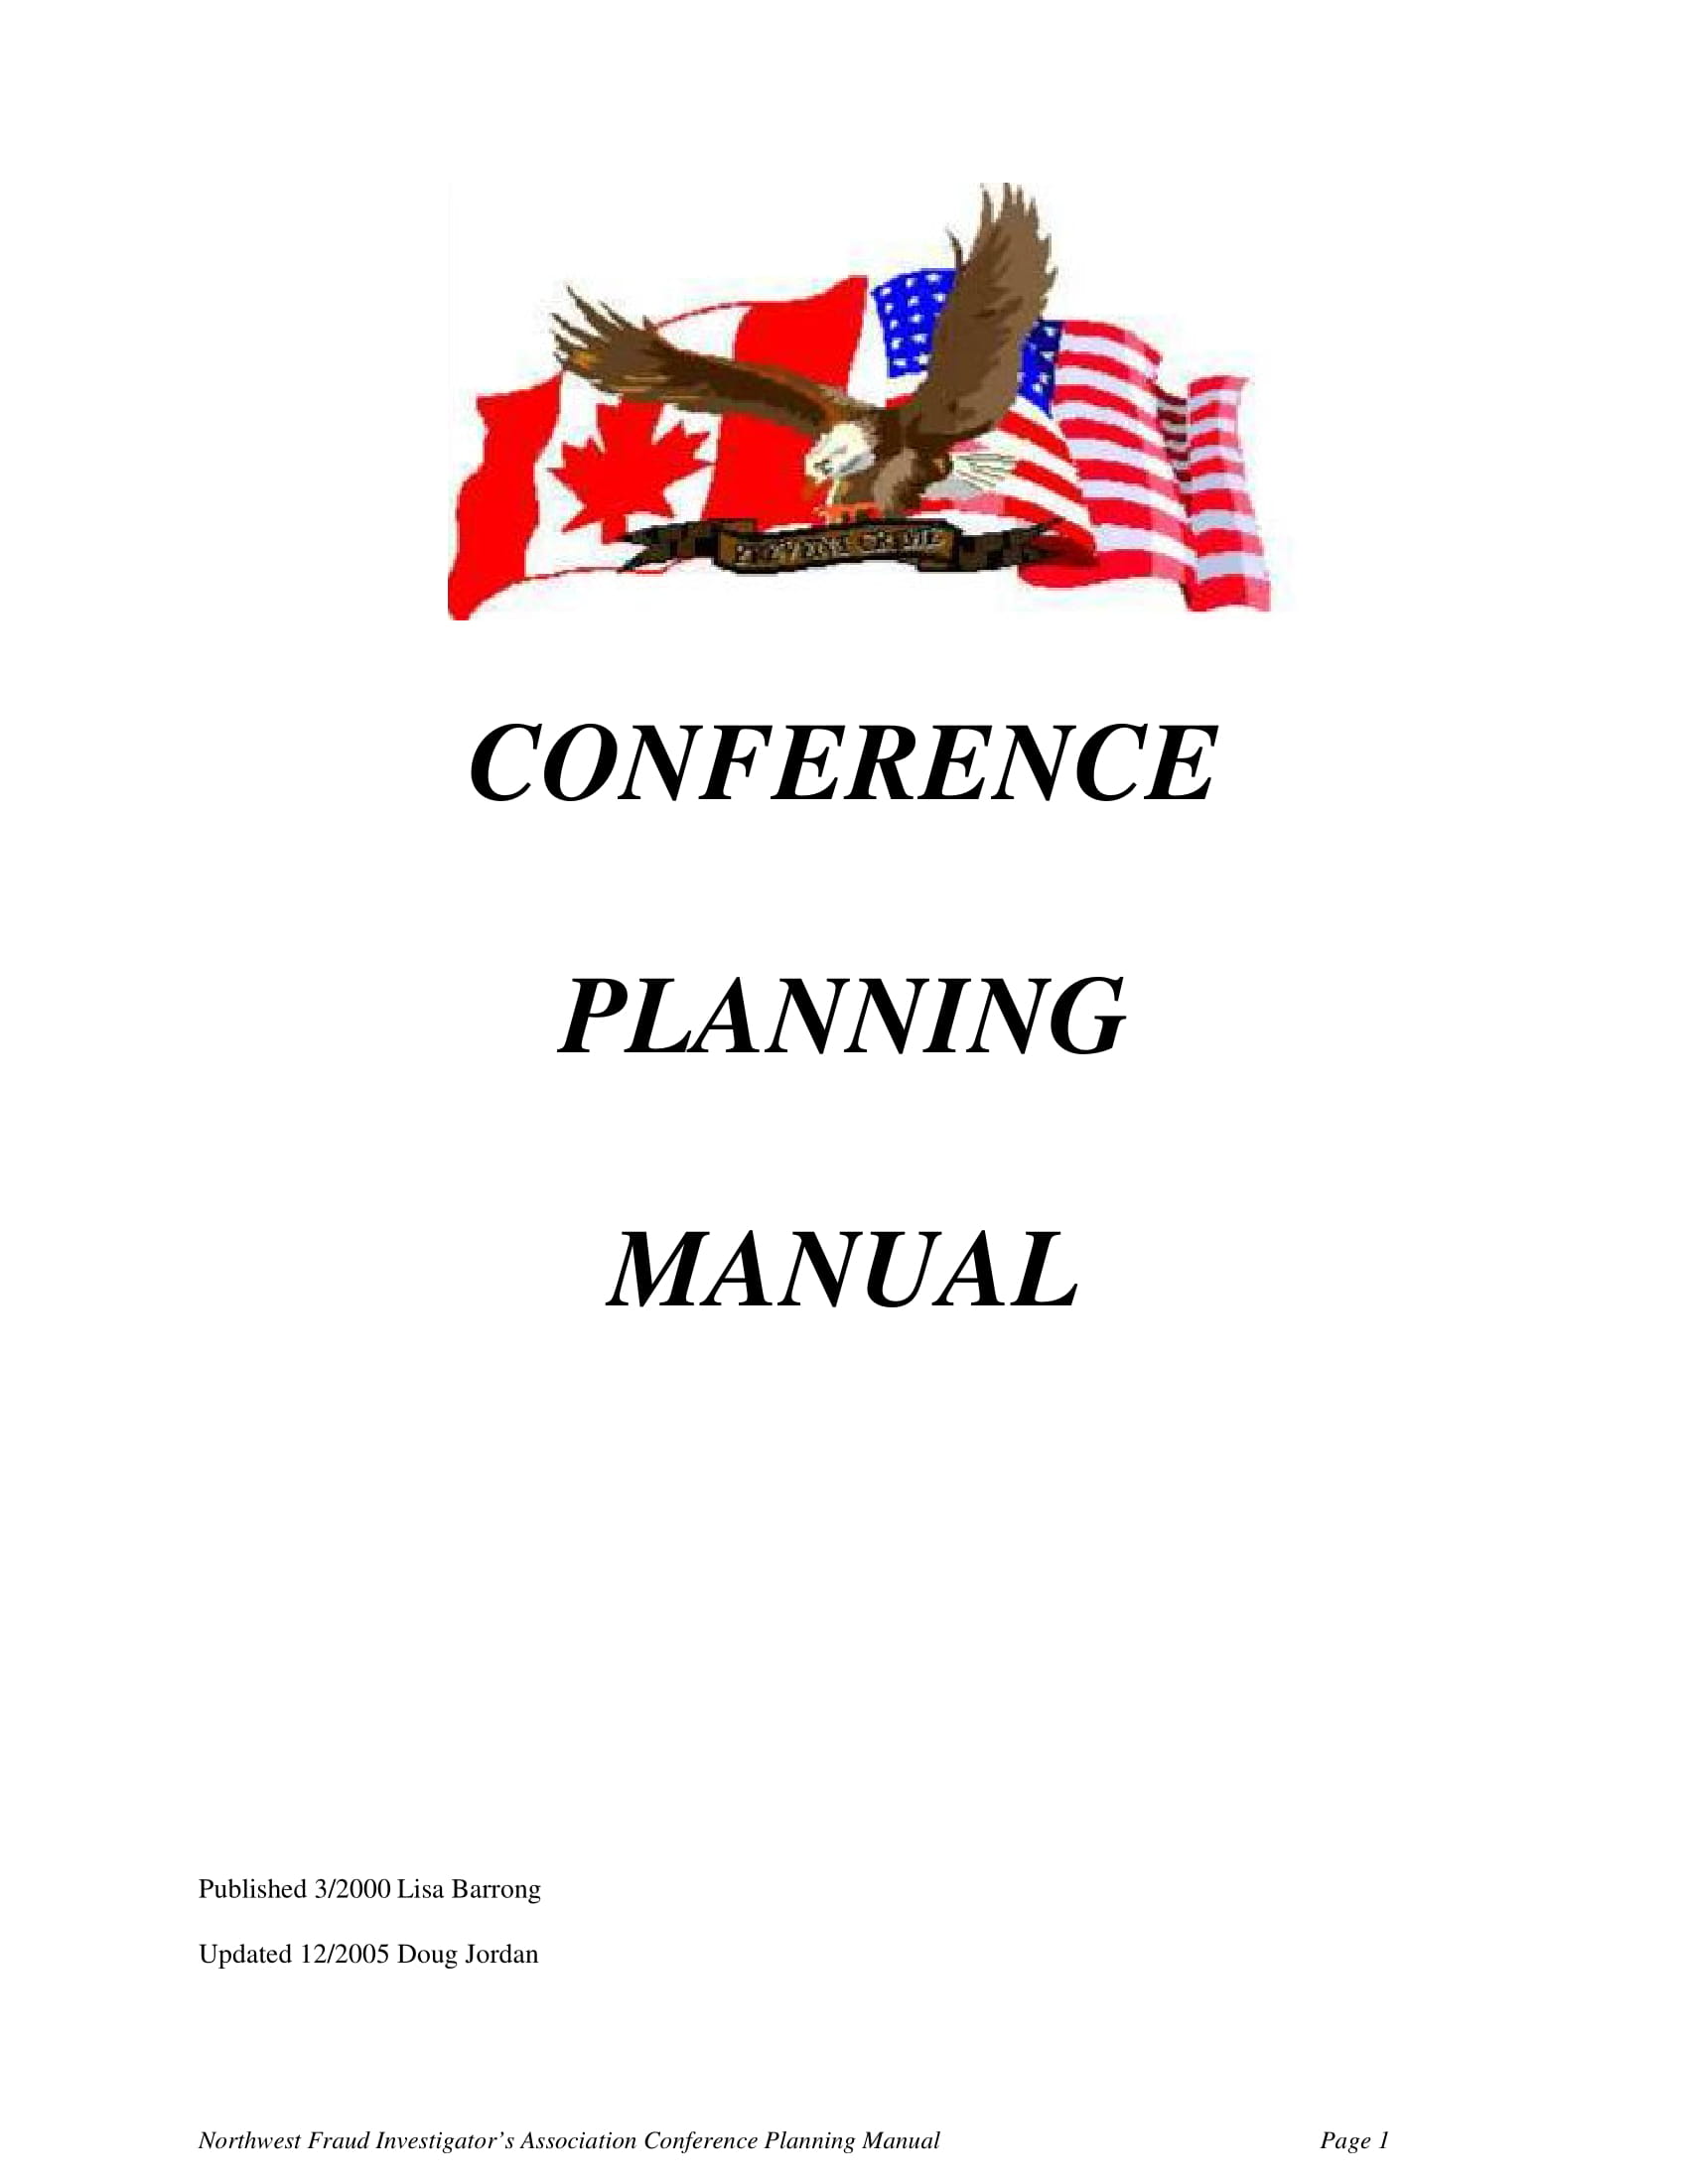 conference project planning manual example 01